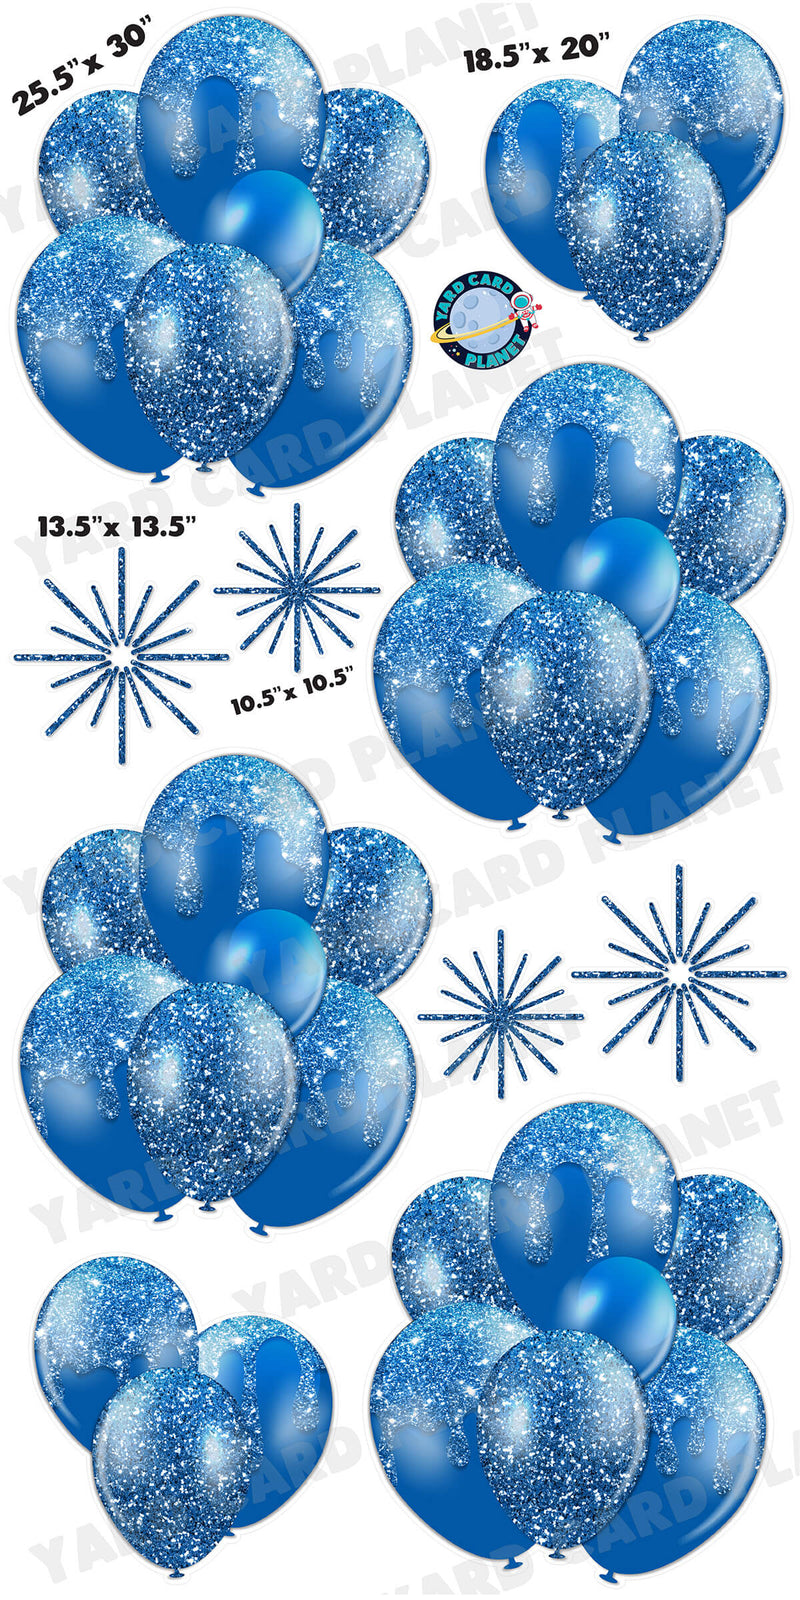 Blue Glitter Balloon Bouquets and Starbursts Yard Card Set